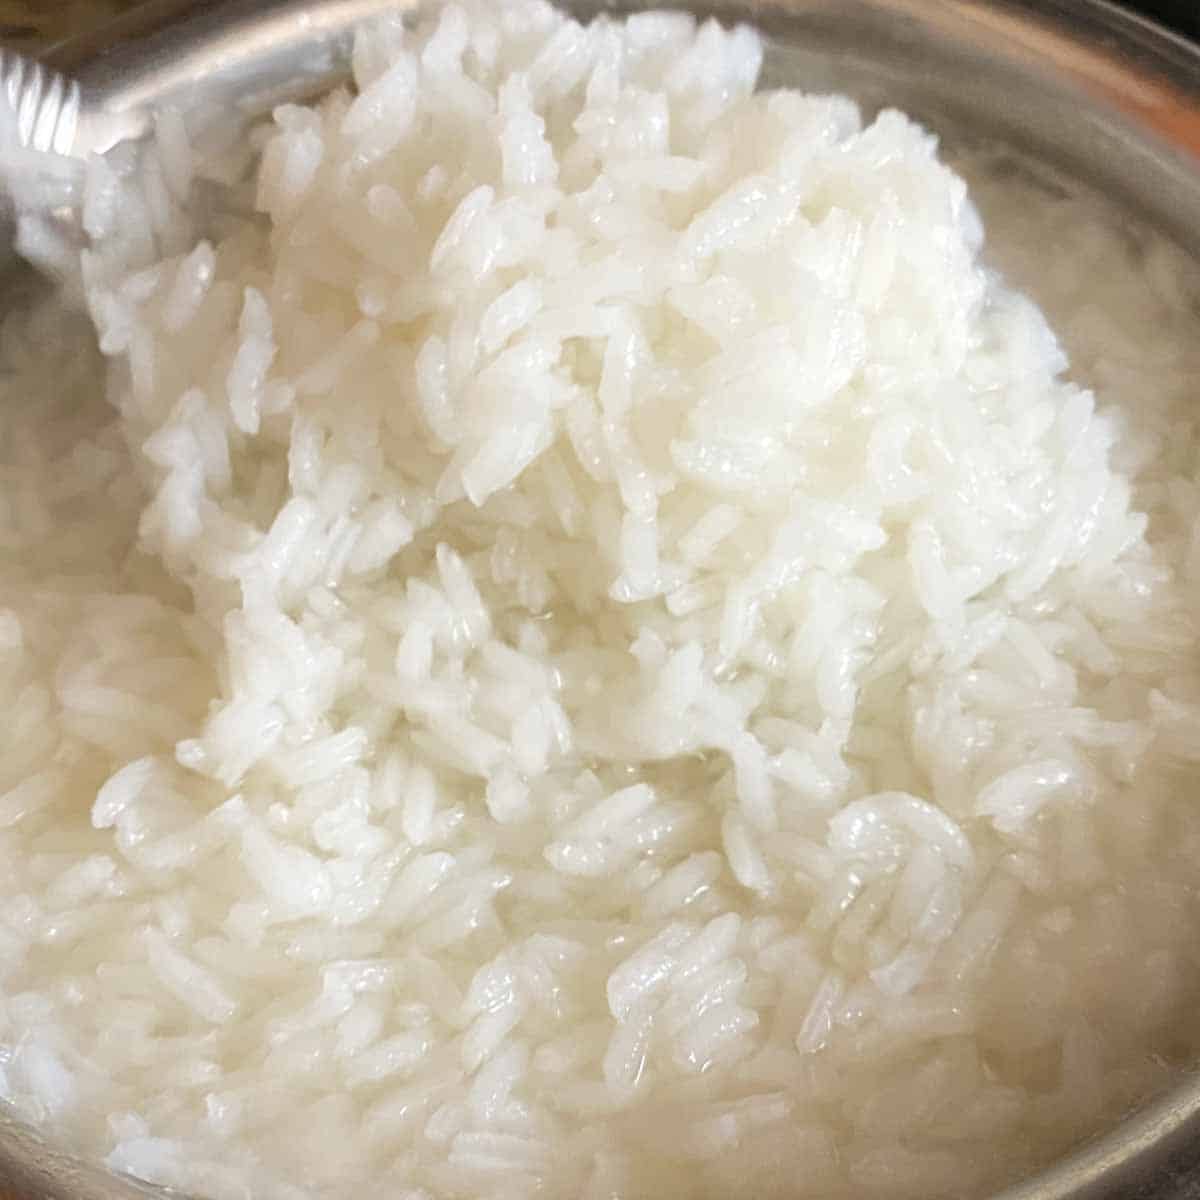 Basmati rice cooked in water for rice pudding